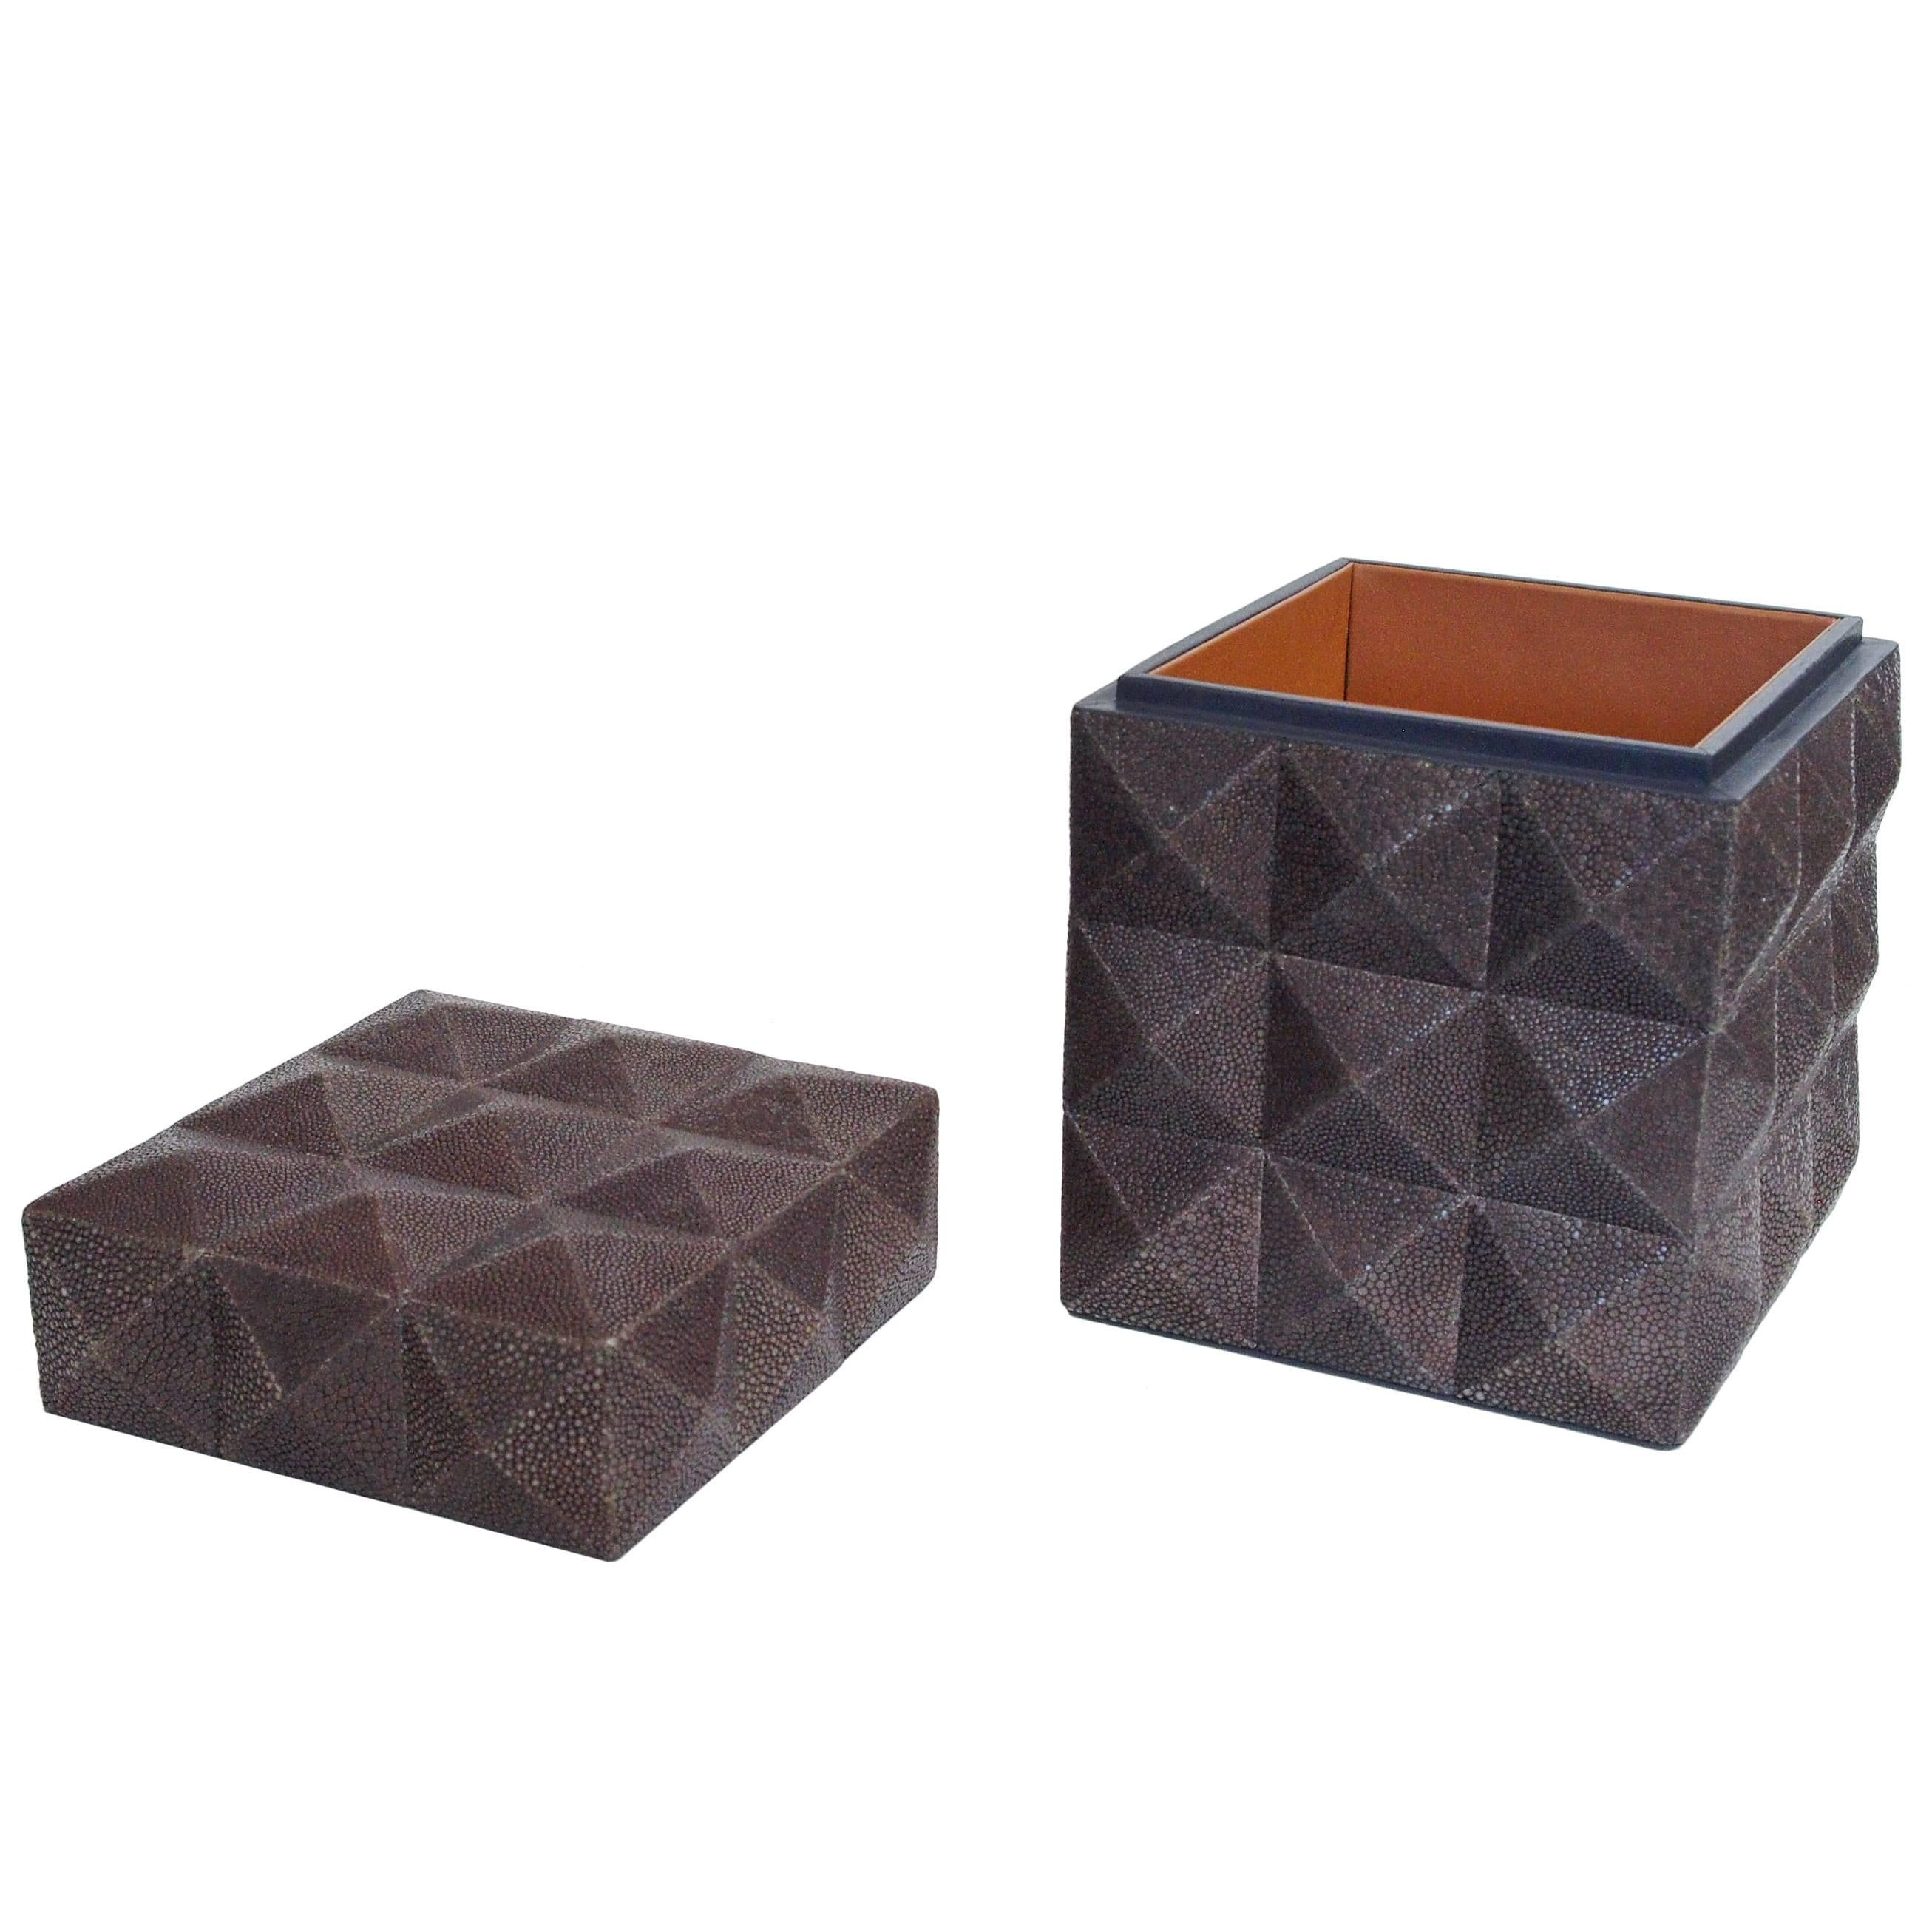 Italian gray Shagreen box with four sided pyramid pattern
Designed by Fabio Bergomi for Fabio Ltd / Made in Italy
Height: 8 inches / Width: 6 inches /Depth: 6 inches
1 in stock in Palm Springs ON FINAL CLEARANCE SALE for $899 !!! 
Order Reference #: